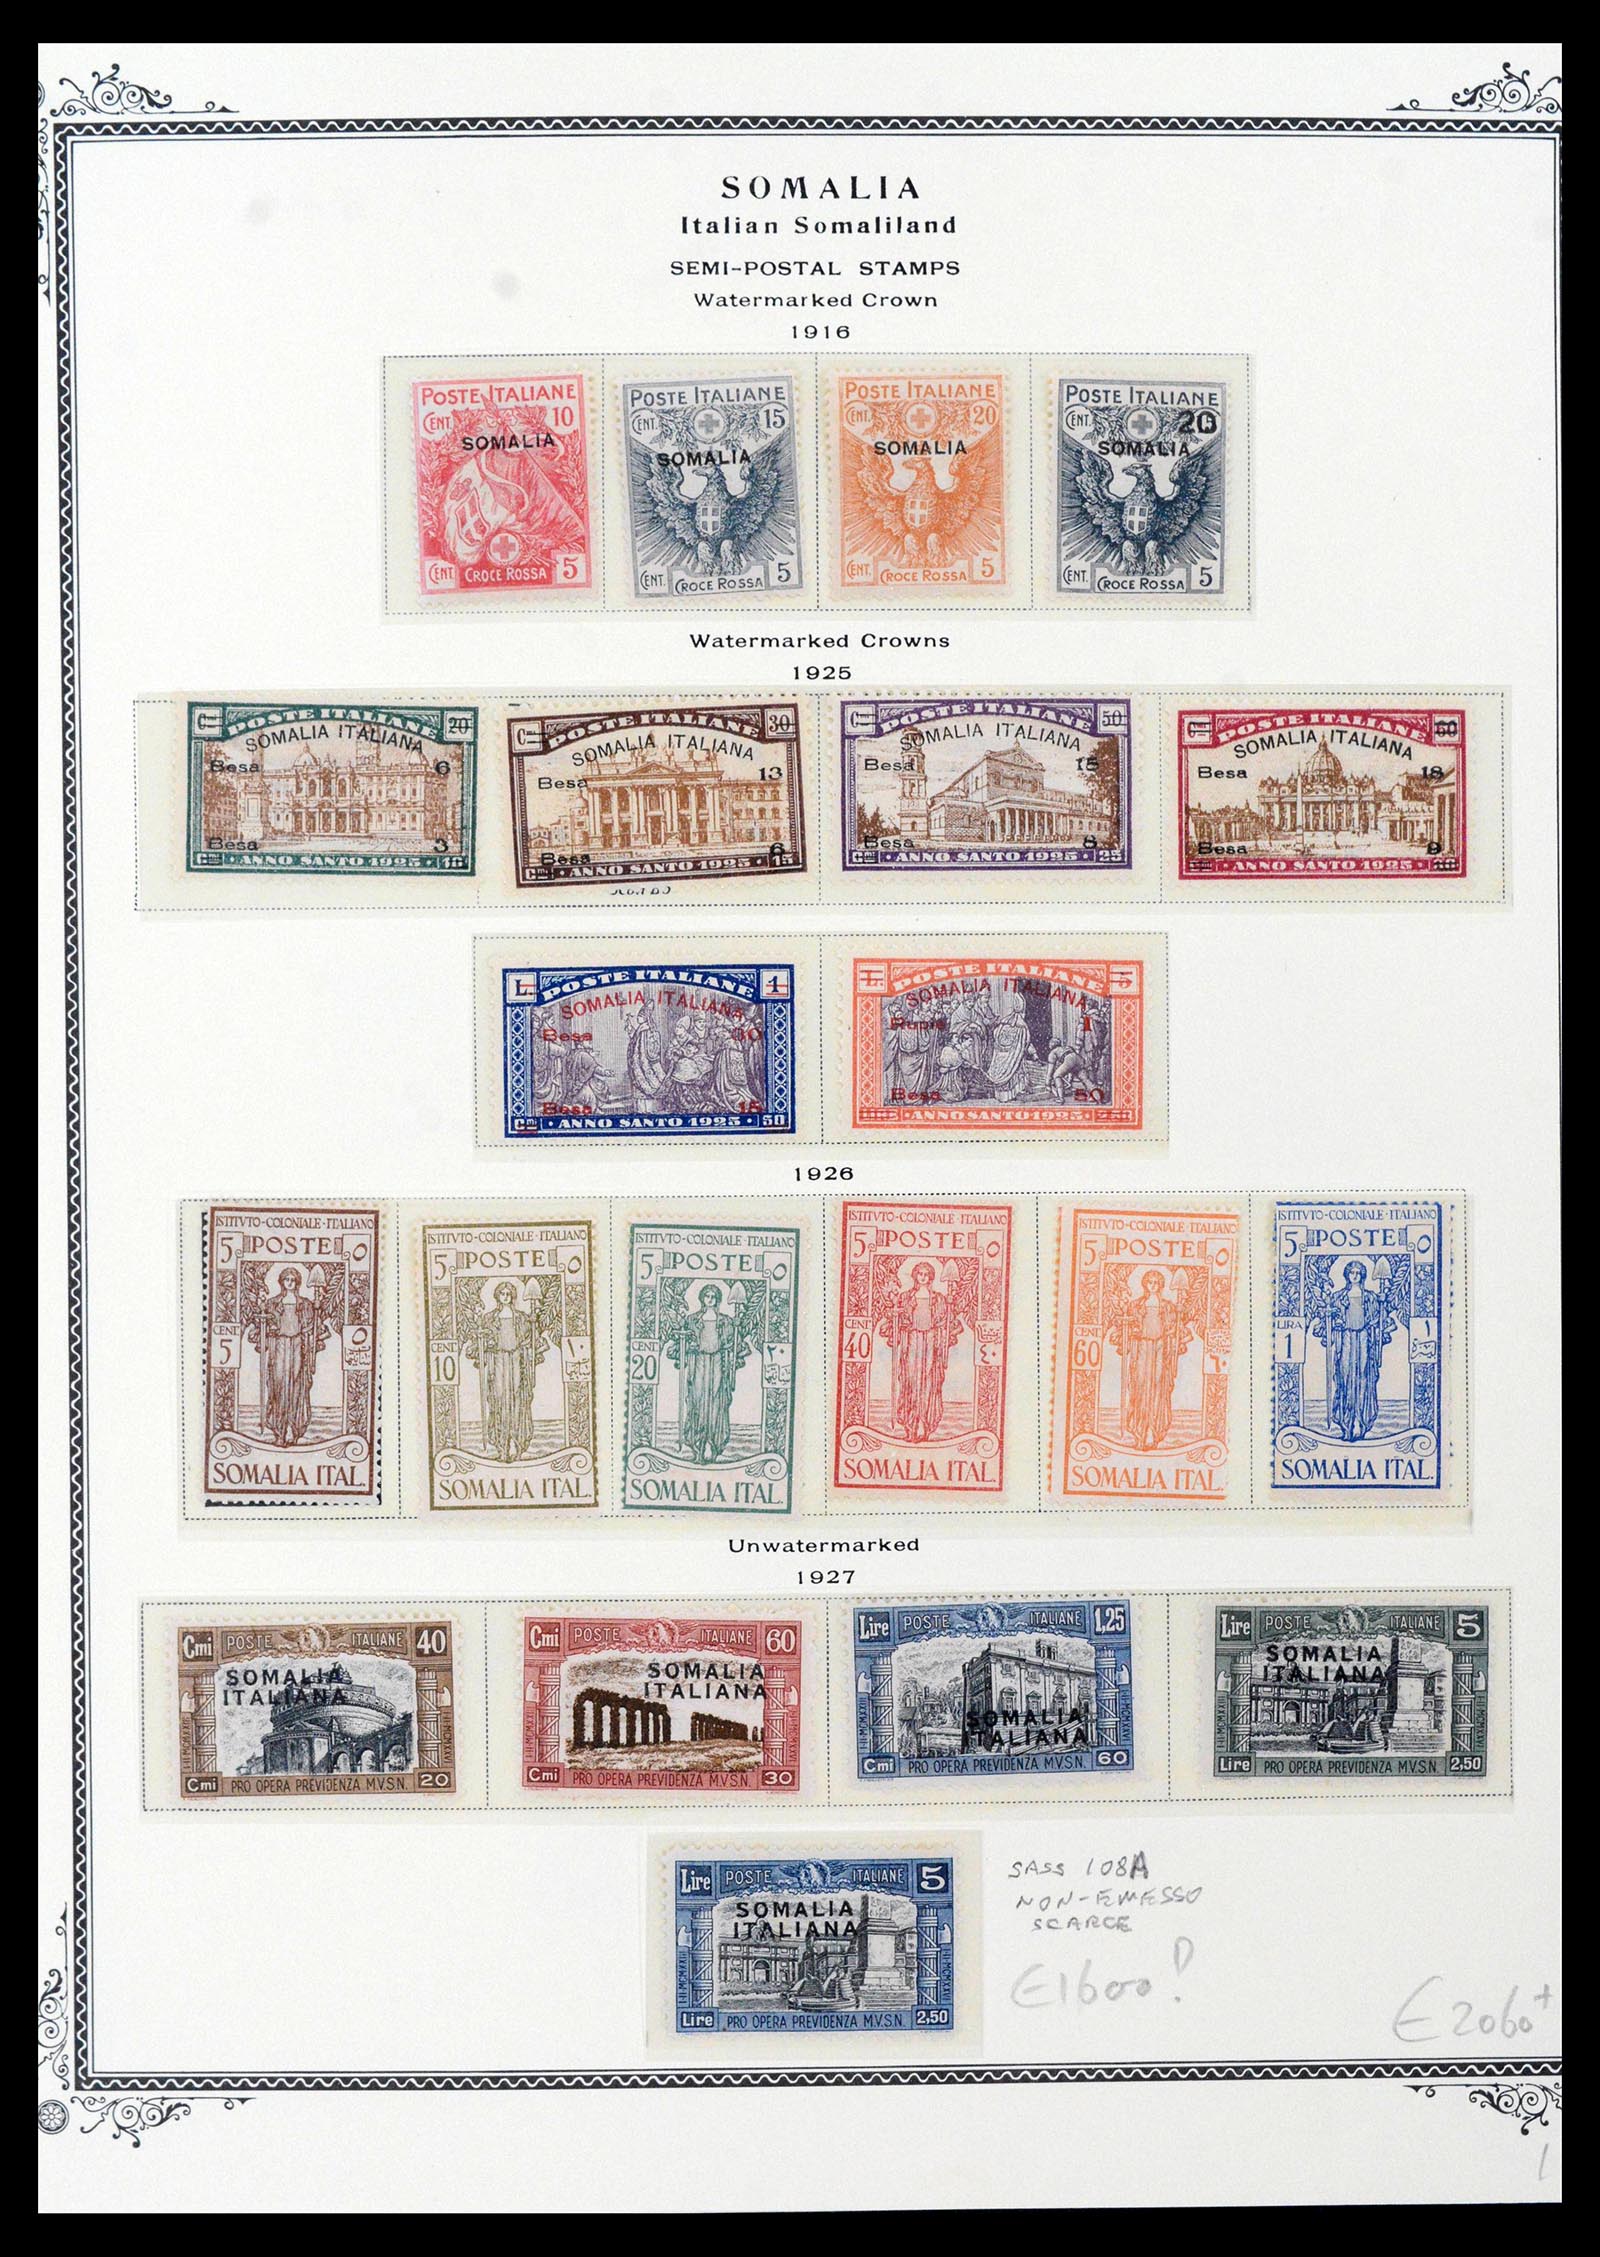 39011 0026 - Stamp collection 39011 Somalia complete 1903-1960.